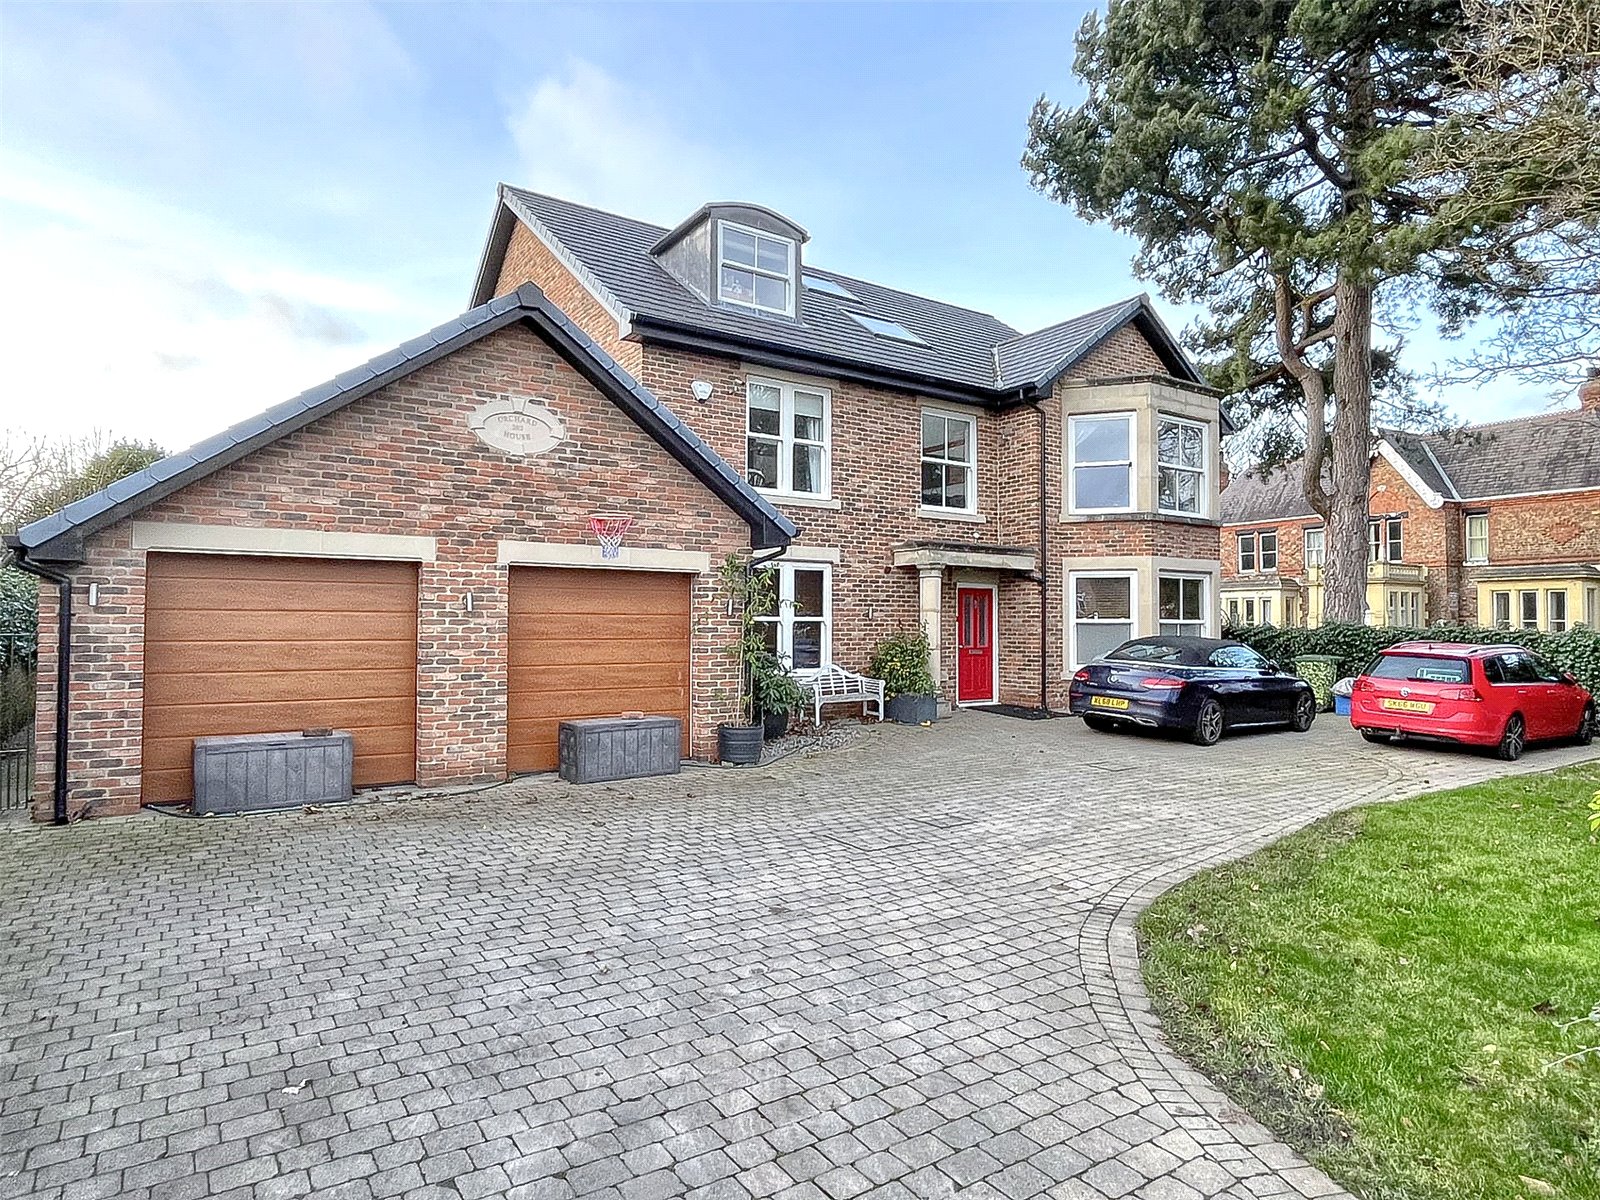 6 bed house for sale in Yarm Road, Eaglescliffe - Property Image 1